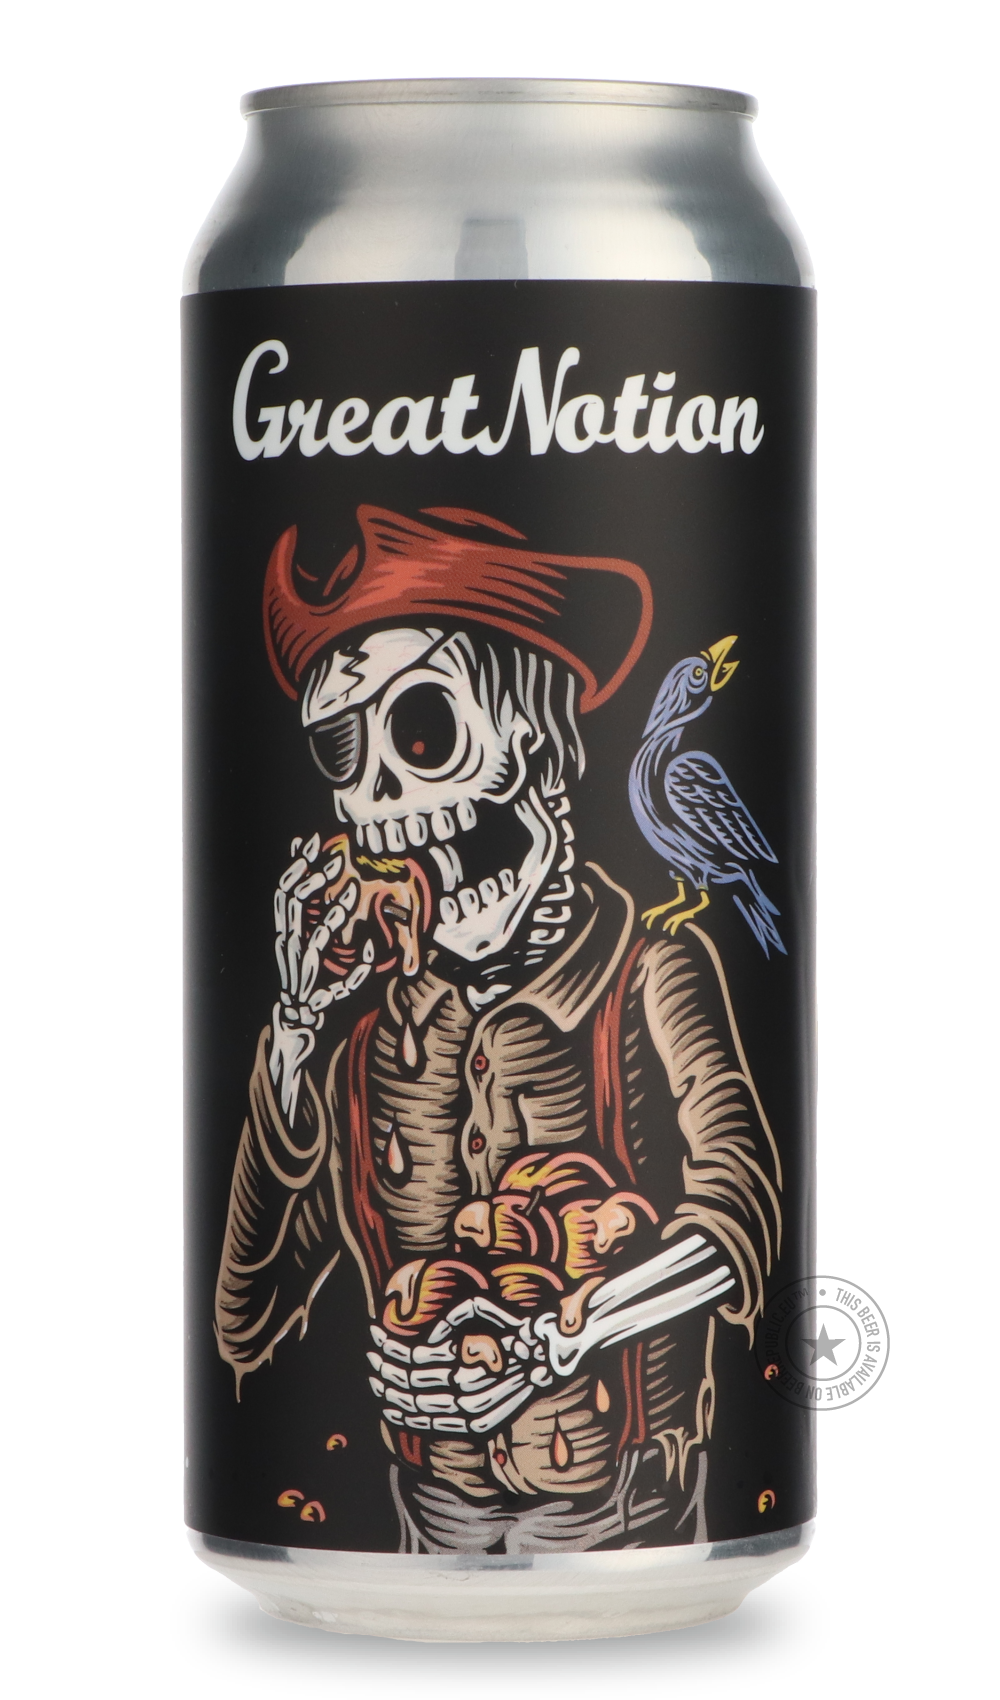 -Great Notion- Ripe-IPA- Only @ Beer Republic - The best online beer store for American & Canadian craft beer - Buy beer online from the USA and Canada - Bier online kopen - Amerikaans bier kopen - Craft beer store - Craft beer kopen - Amerikanisch bier kaufen - Bier online kaufen - Acheter biere online - IPA - Stout - Porter - New England IPA - Hazy IPA - Imperial Stout - Barrel Aged - Barrel Aged Imperial Stout - Brown - Dark beer - Blond - Blonde - Pilsner - Lager - Wheat - Weizen - Amber - Barley Wine -